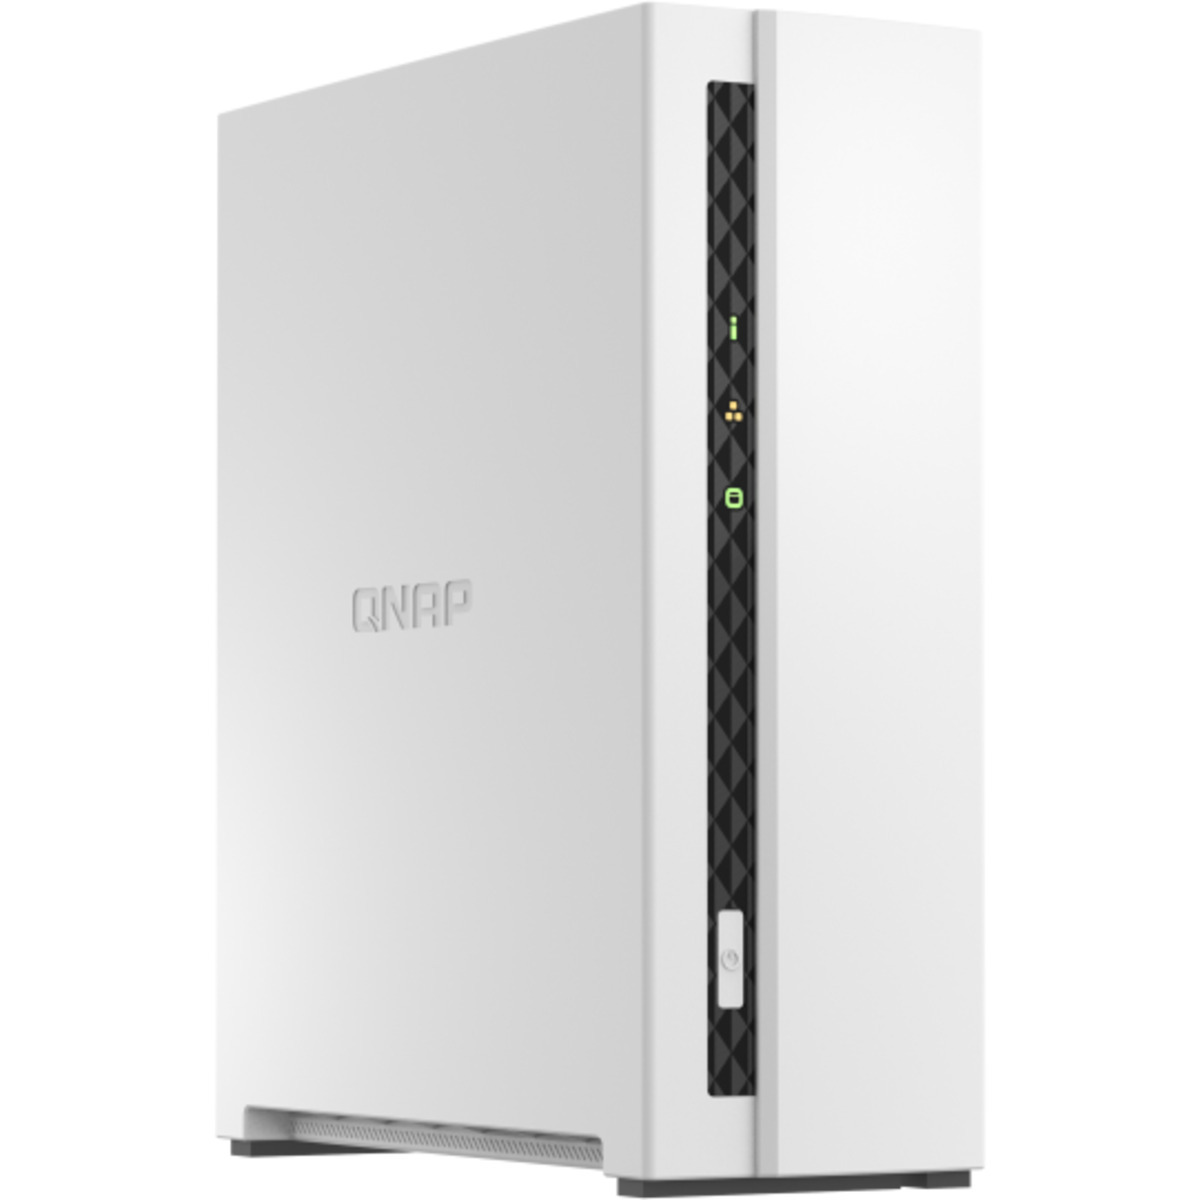 QNAP TS-133 4tb 1-Bay Desktop Personal / Basic Home / Small Office NAS - Network Attached Storage Device 1x4tb Seagate IronWolf ST4000VN006 3.5 5400rpm SATA 6Gb/s HDD NAS Class Drives Installed - Burn-In Tested TS-133